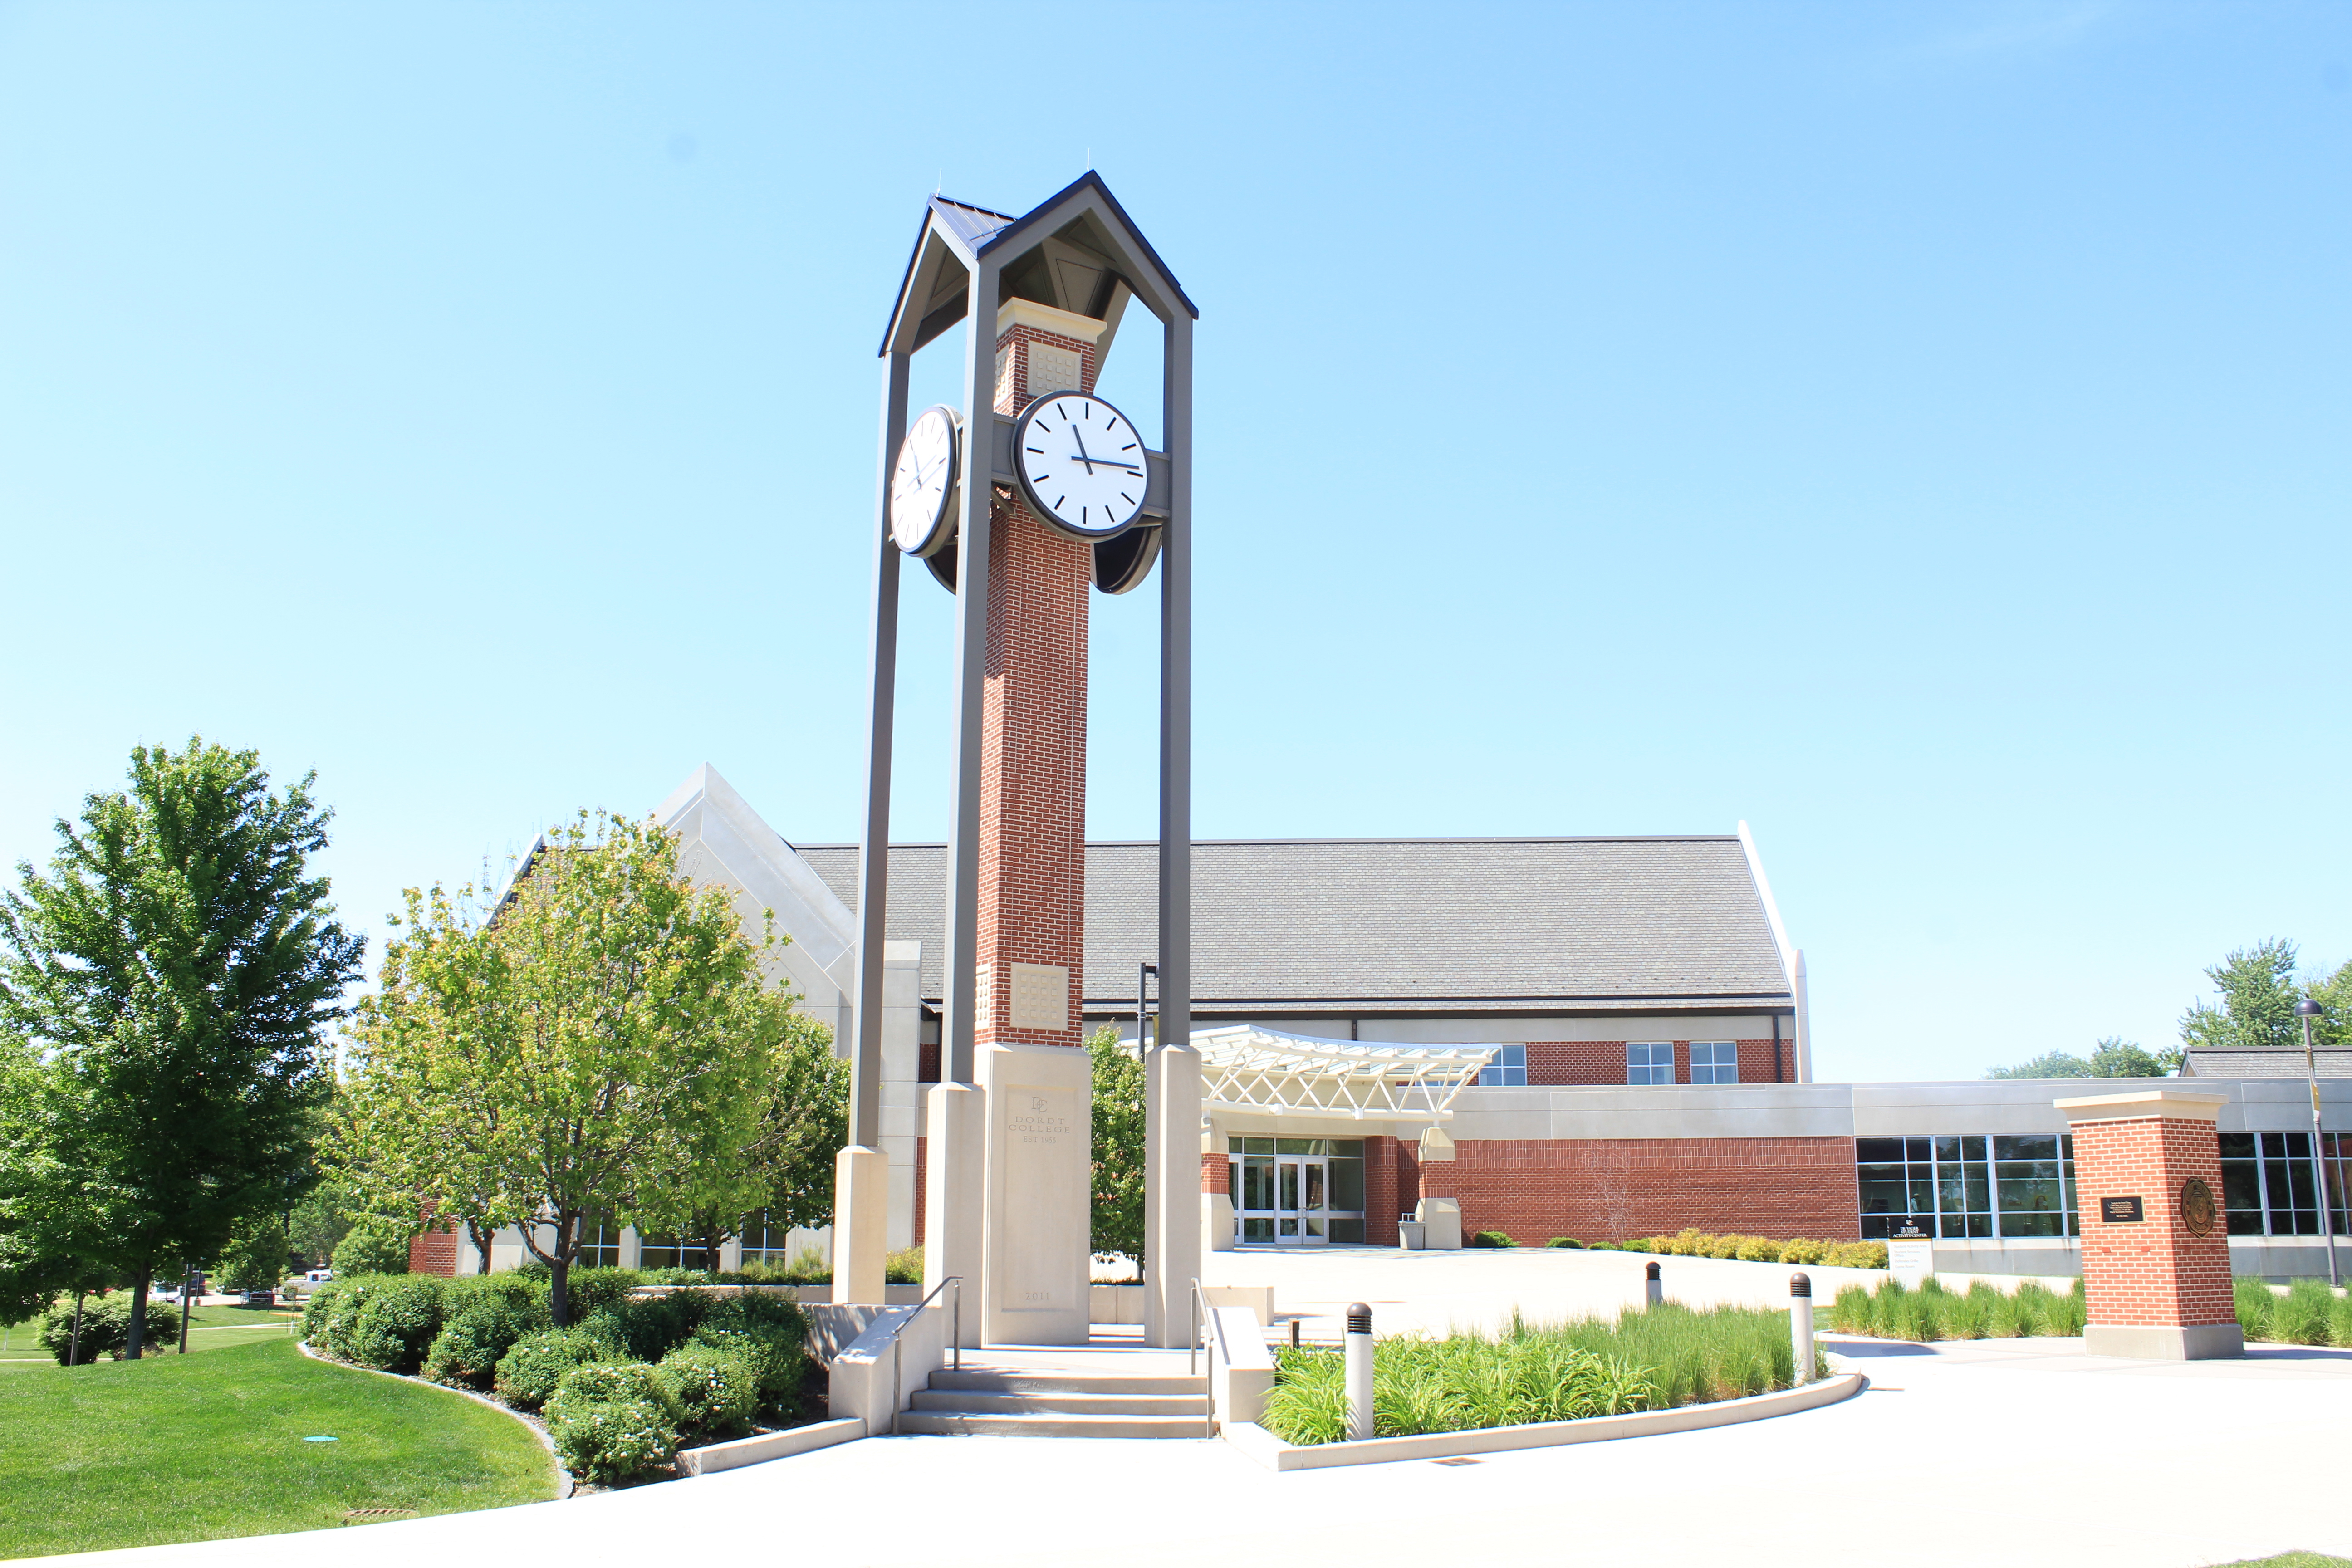 A picture of Dordt's clock tower with the campus center behind